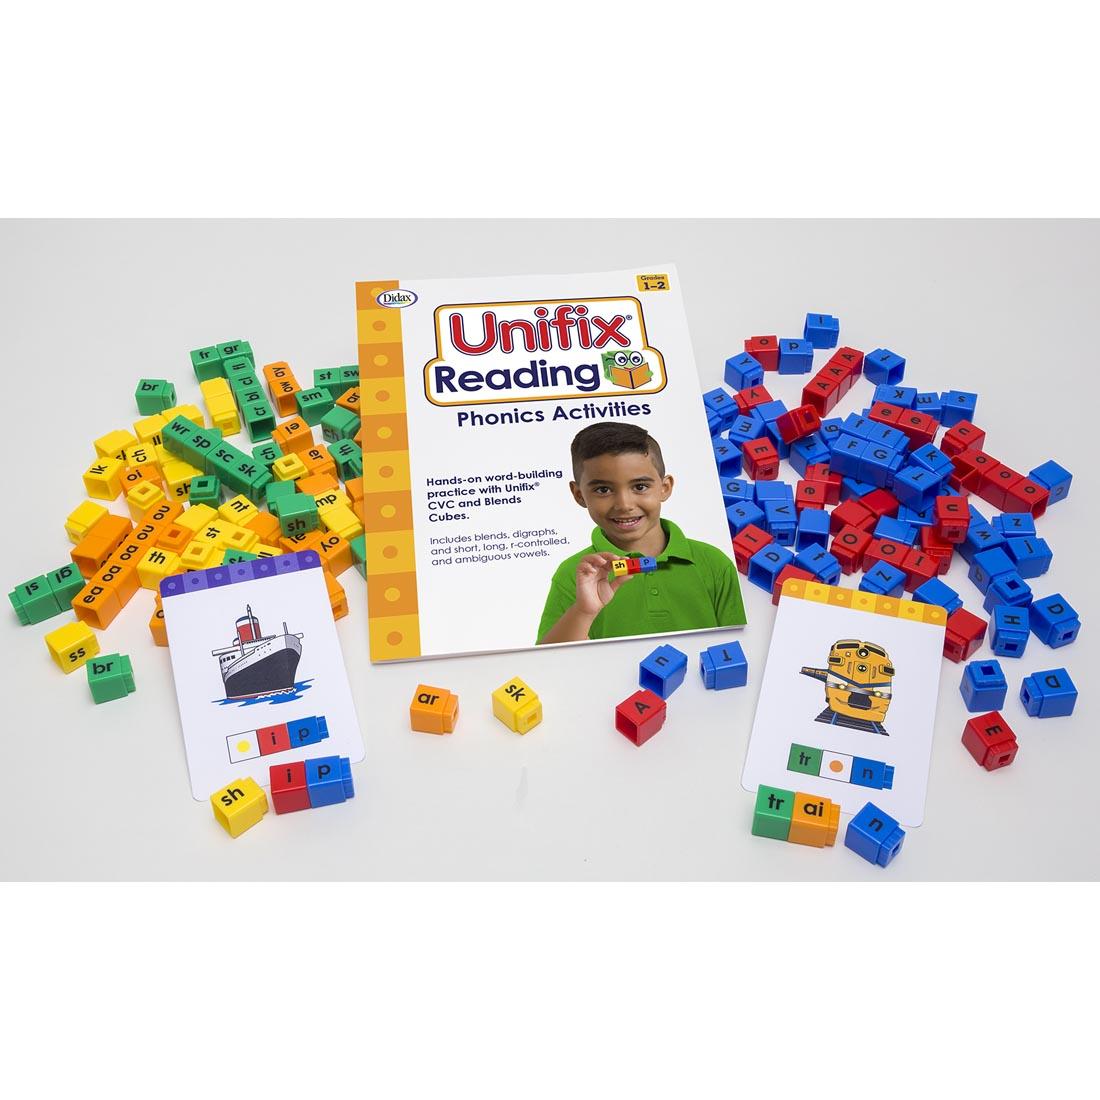 Unifix Reading Phonics Kit by Didax